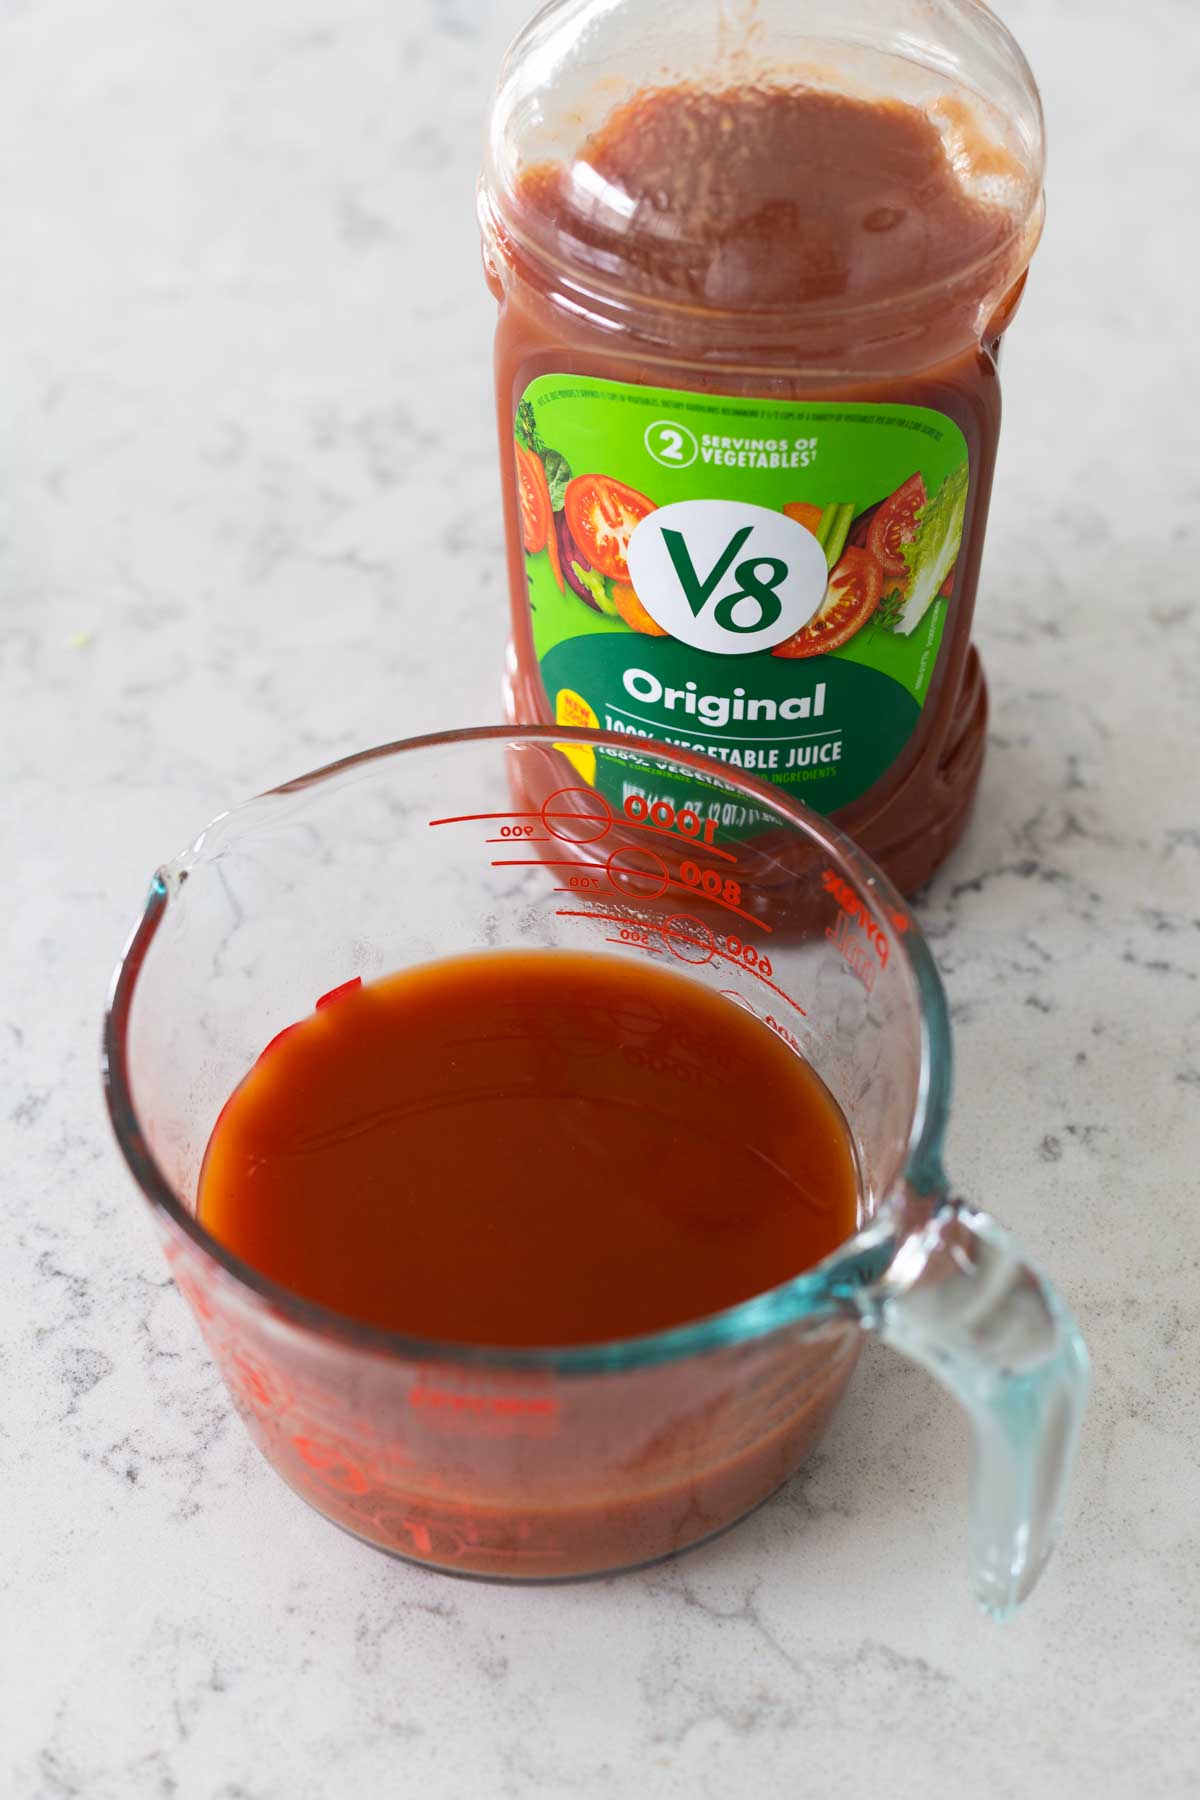 A bottle of V8 juice next to a measuring cup.